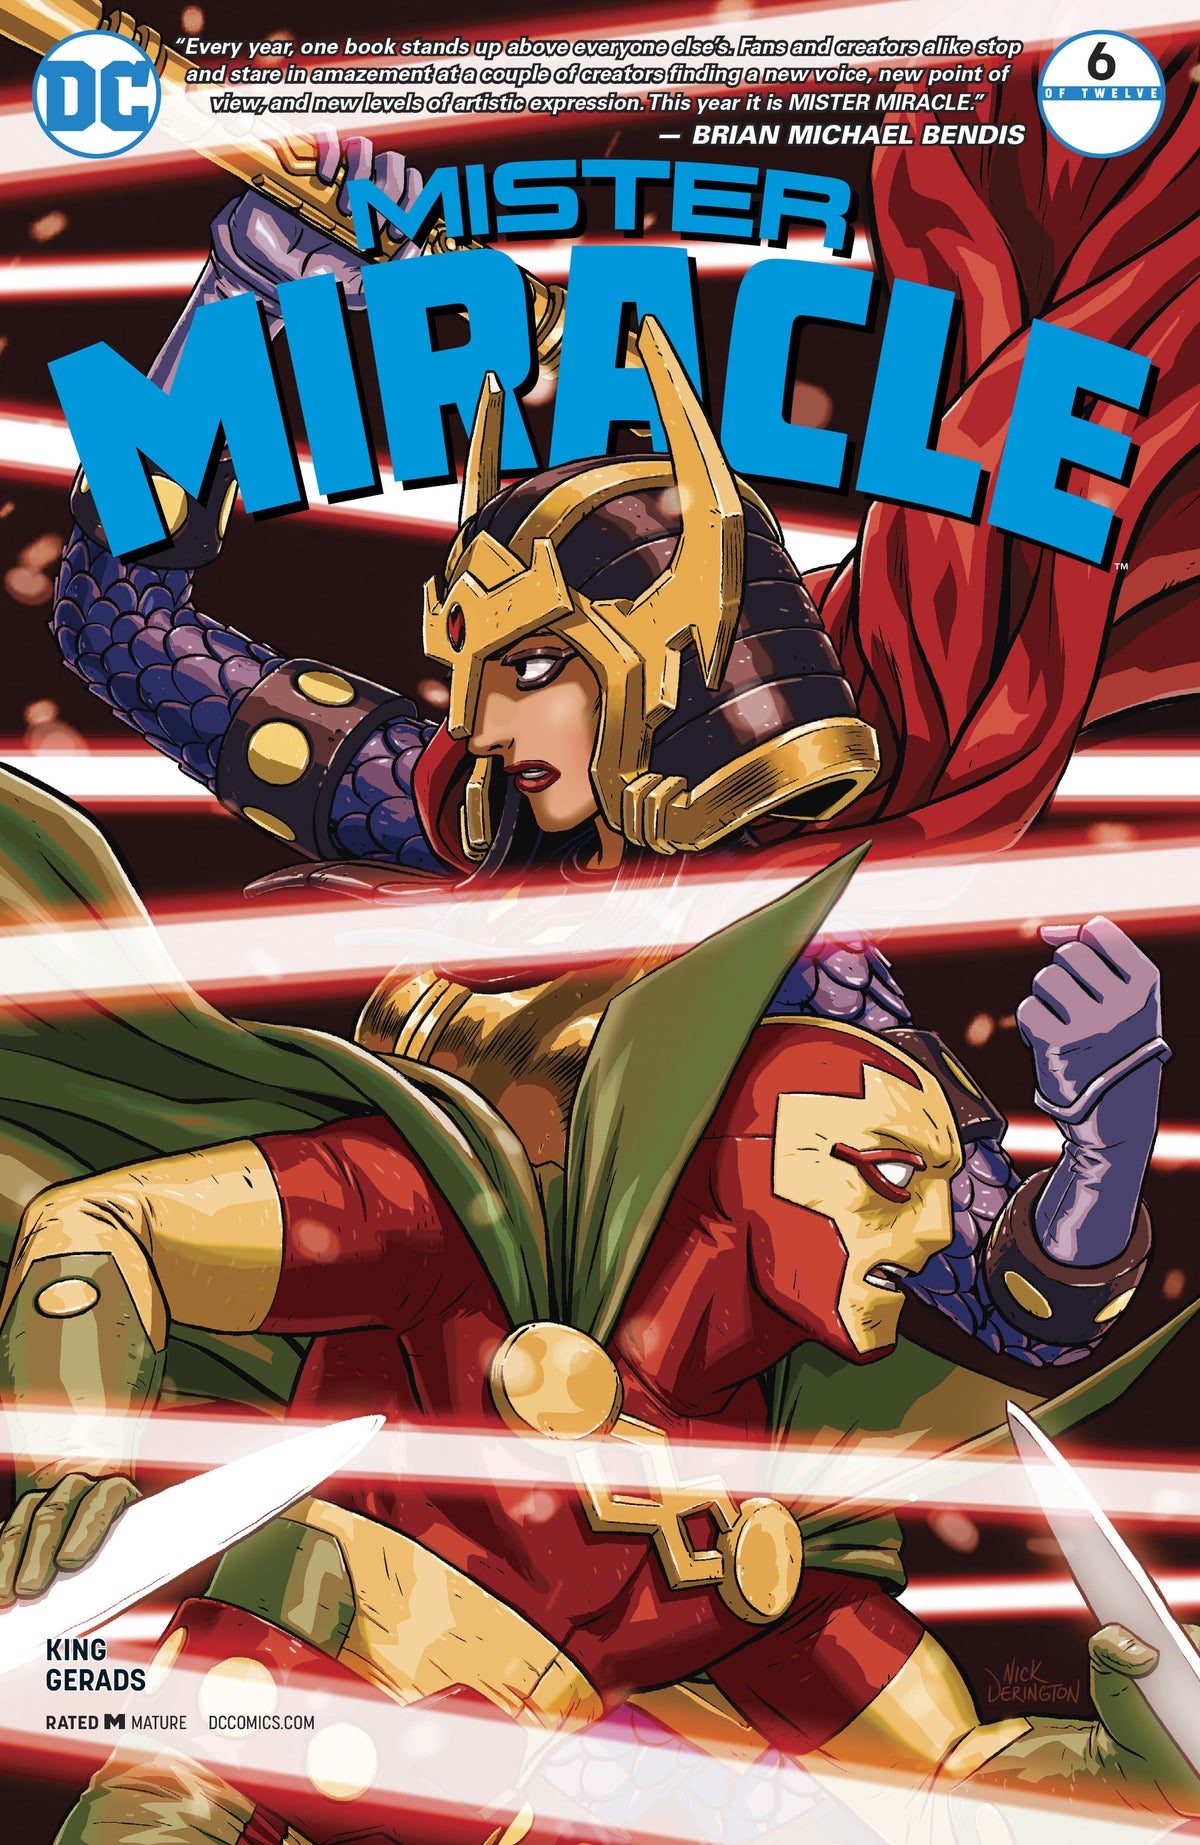 Photo of Mister Miracle Issue 6 (of 12) comic sold by Stronghold Collectibles